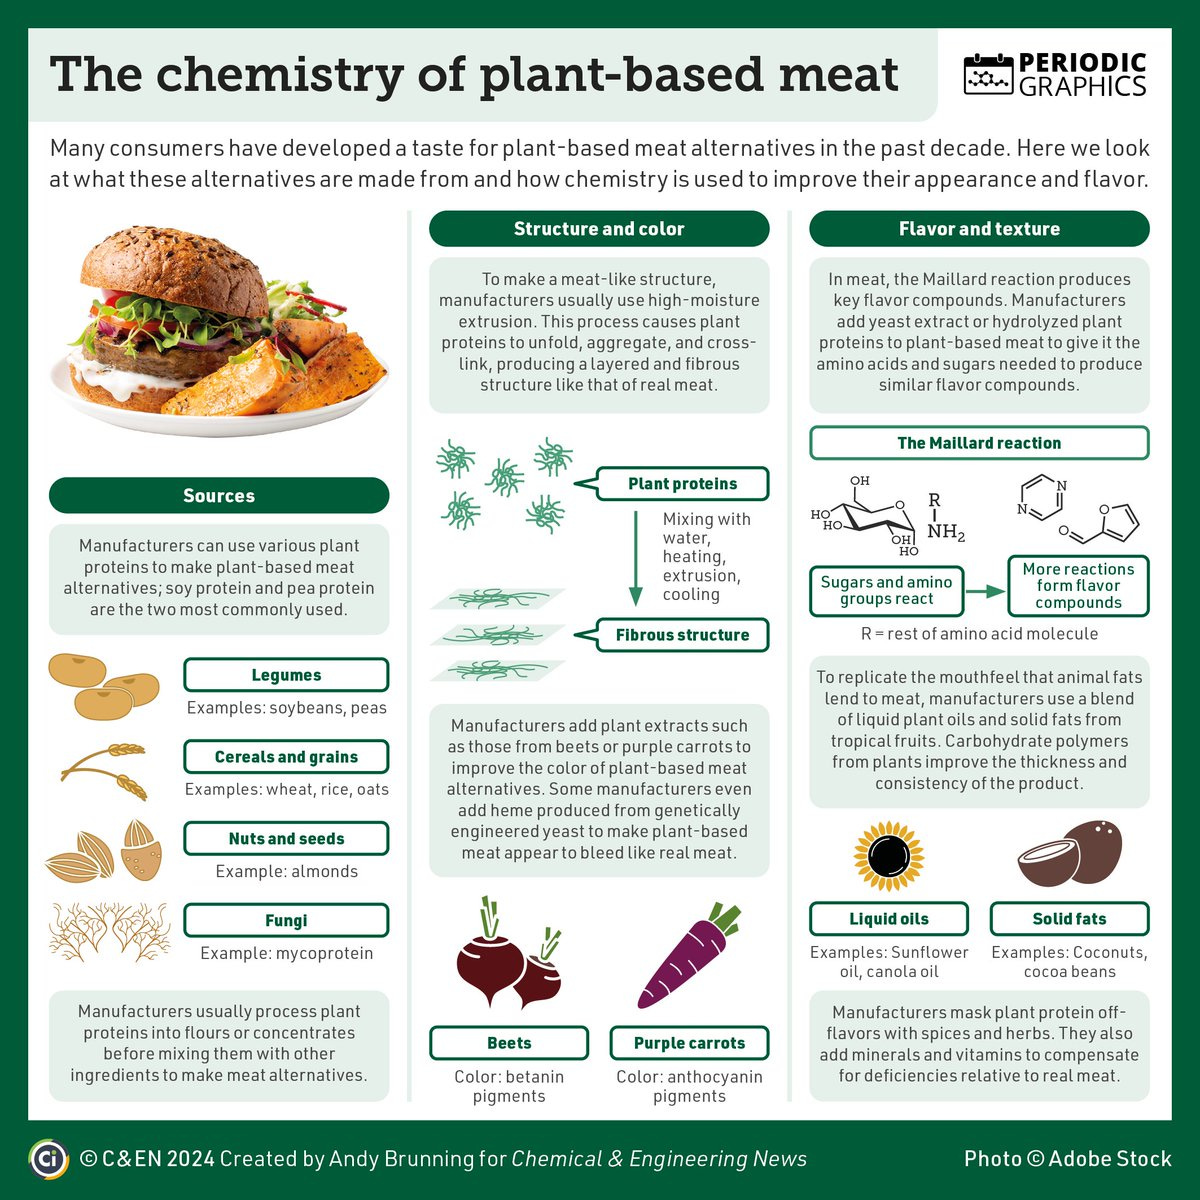 Infographic on the chemistry of plant-based meat. Full alt-text is available at the link.